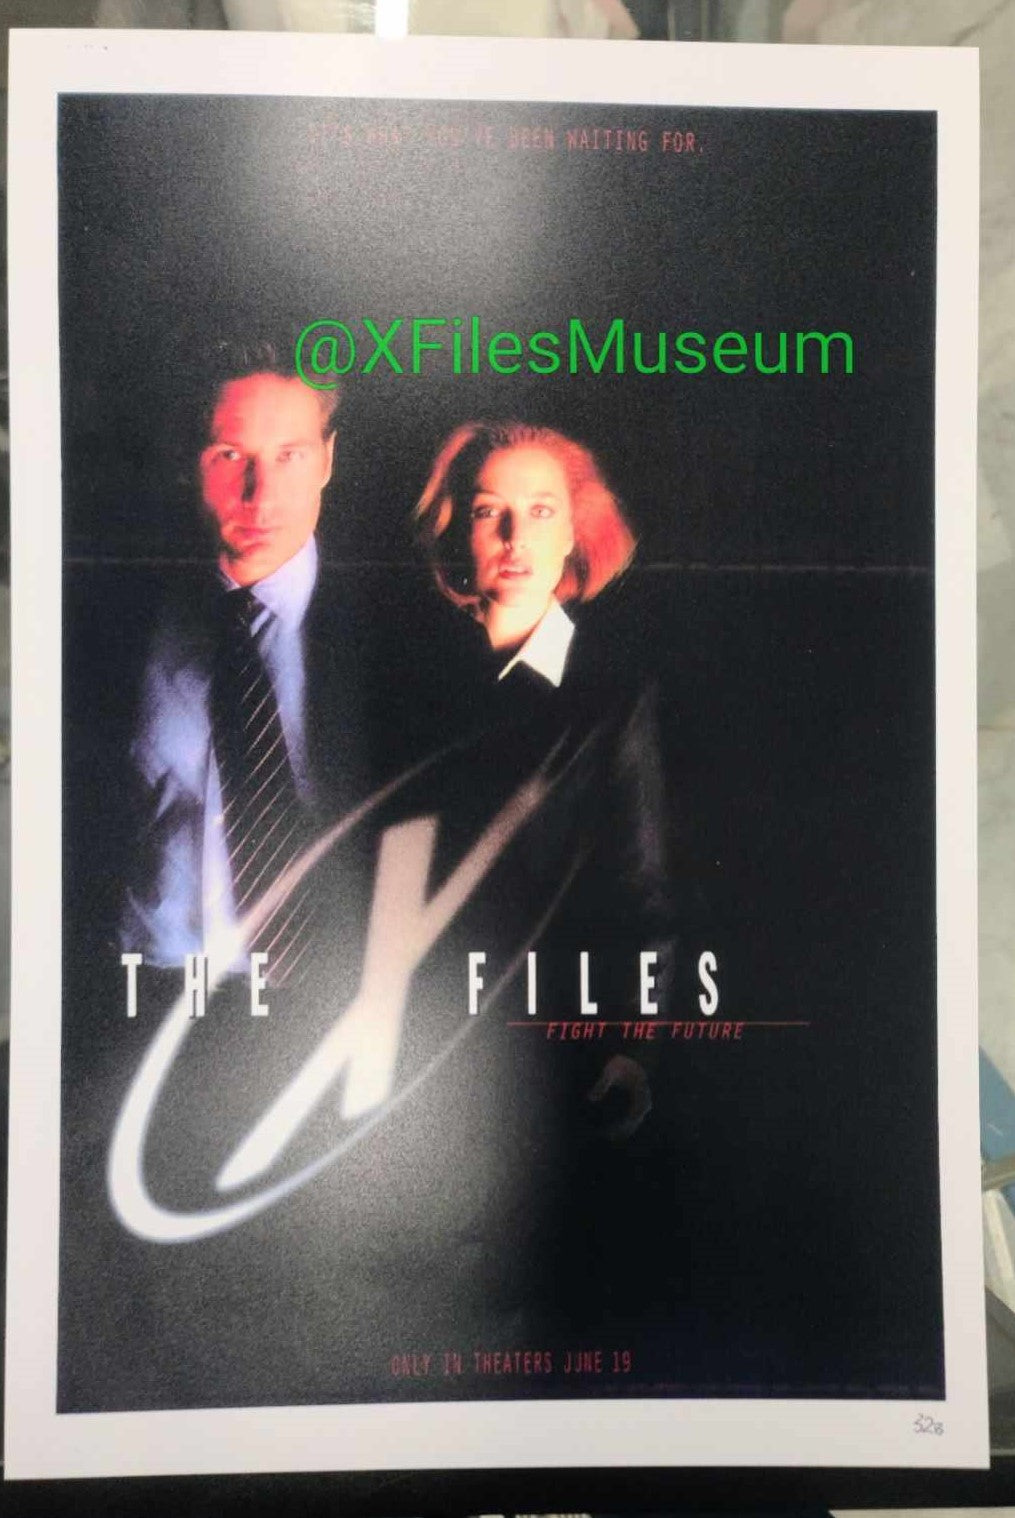 The X-Files FIGHT THE FUTURE Concept Art Print 13" x 19" Poster Print - 42